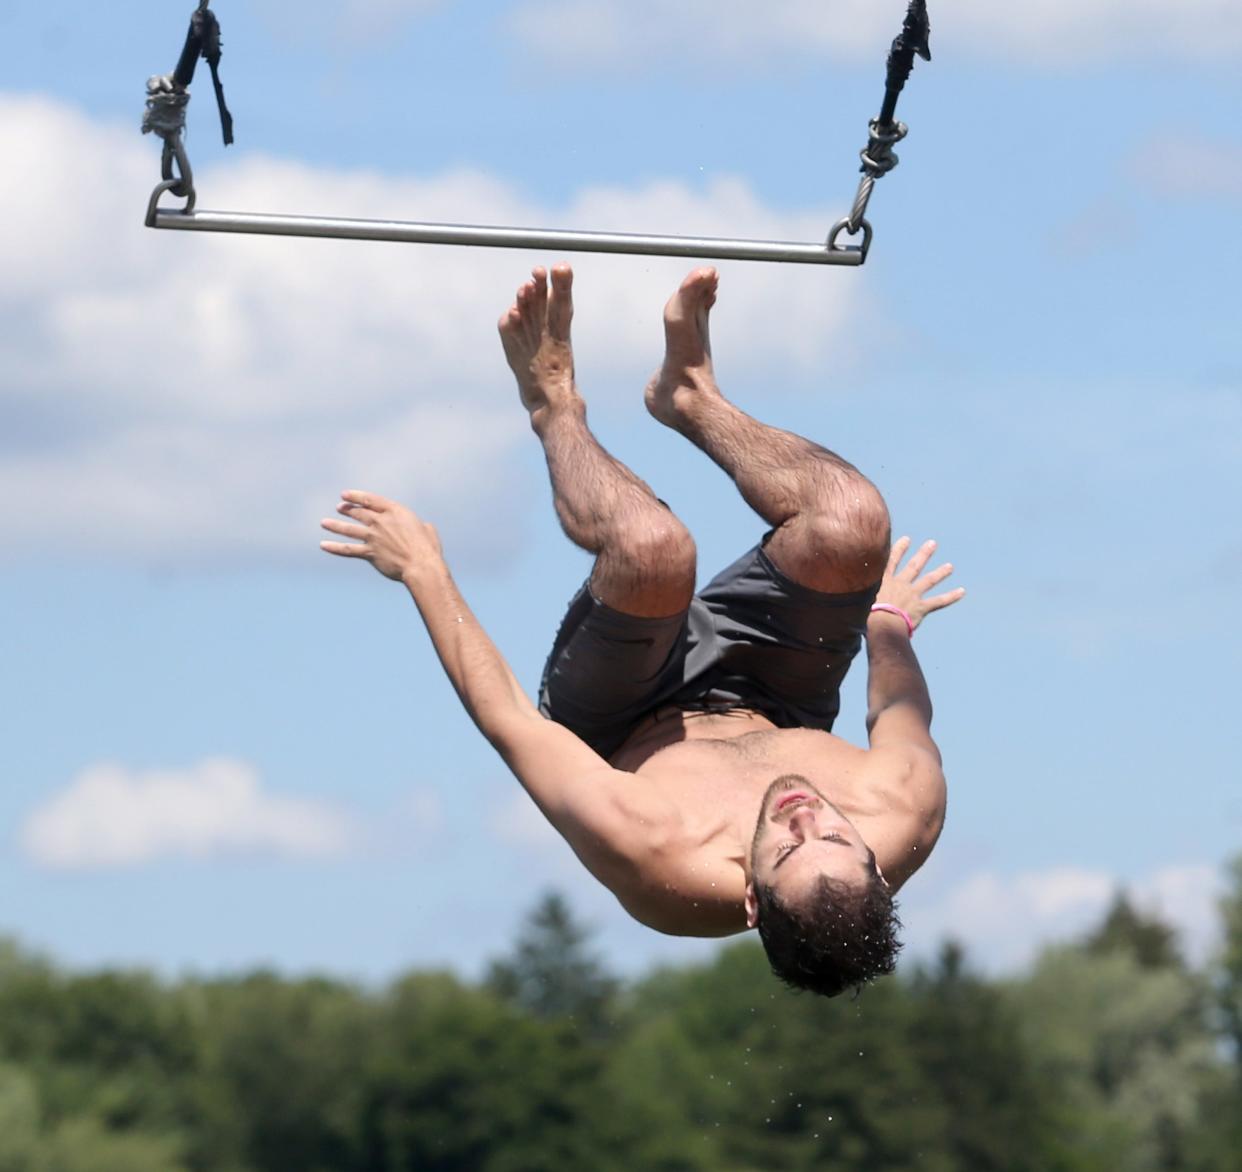 Ethan Klintworth does a backflip off the trapeze at Lake Cable in Jackson Township.